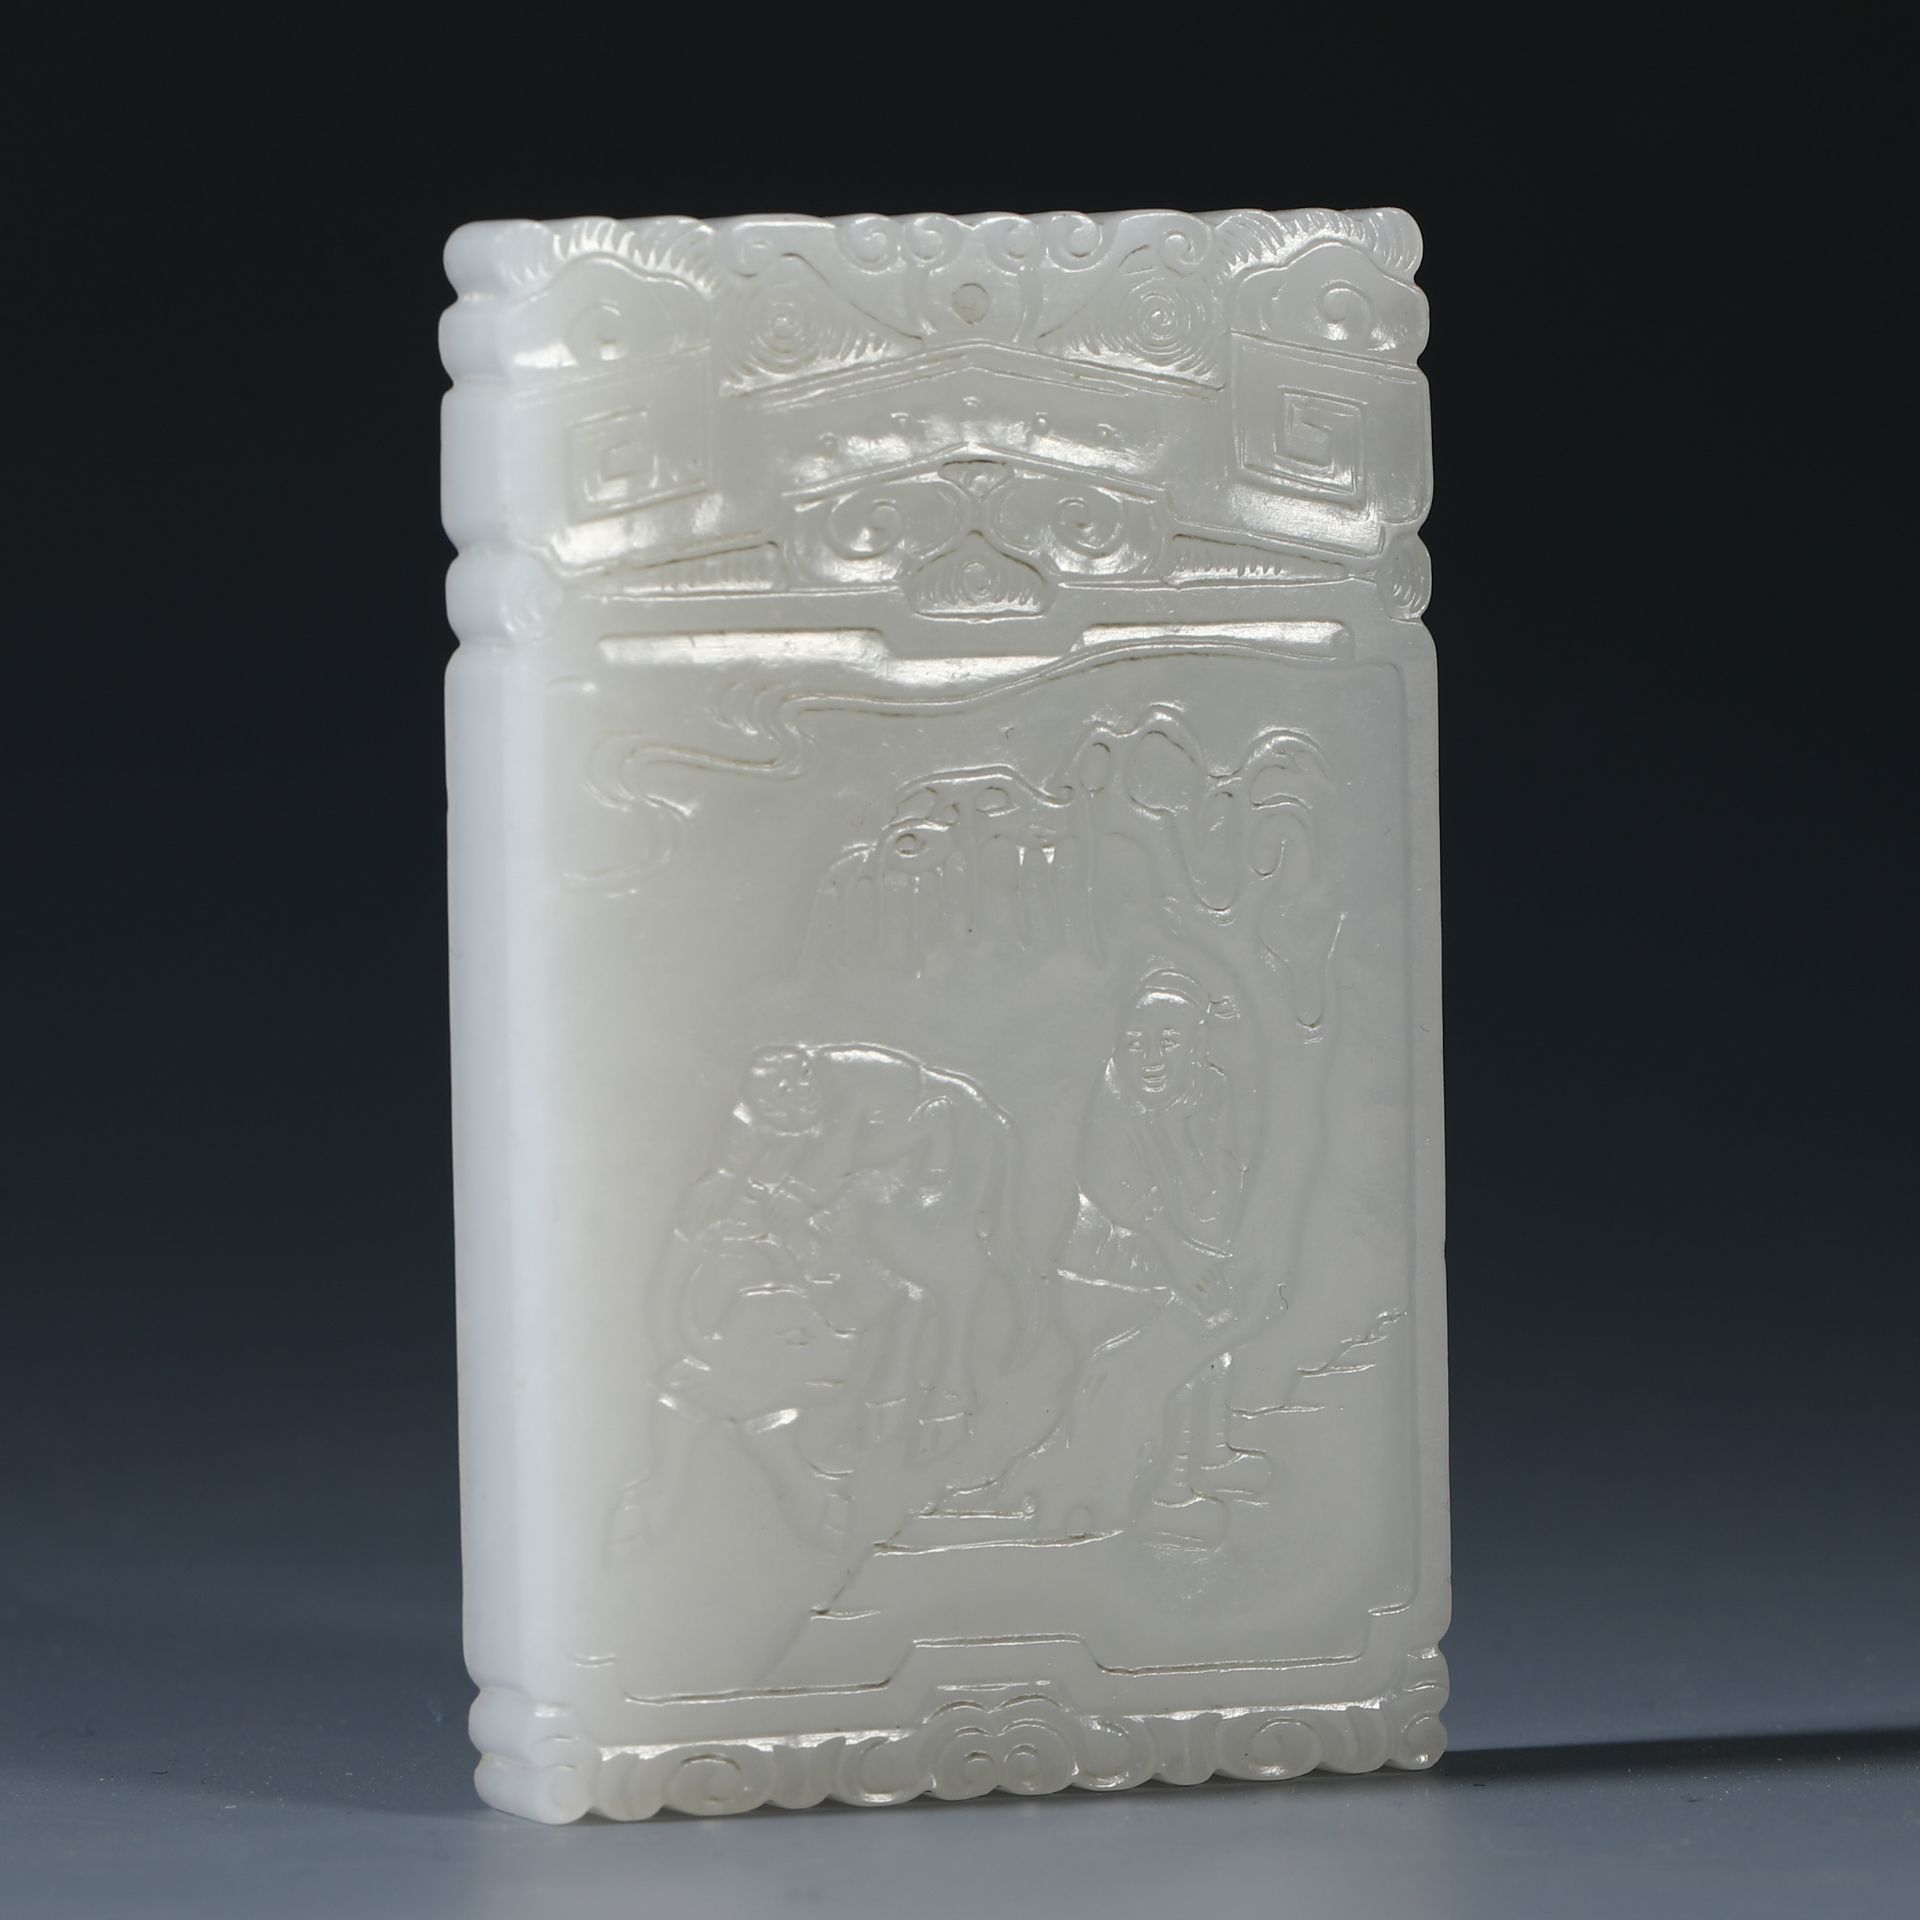 Hetian Jade character plate from  the Qing dynasty